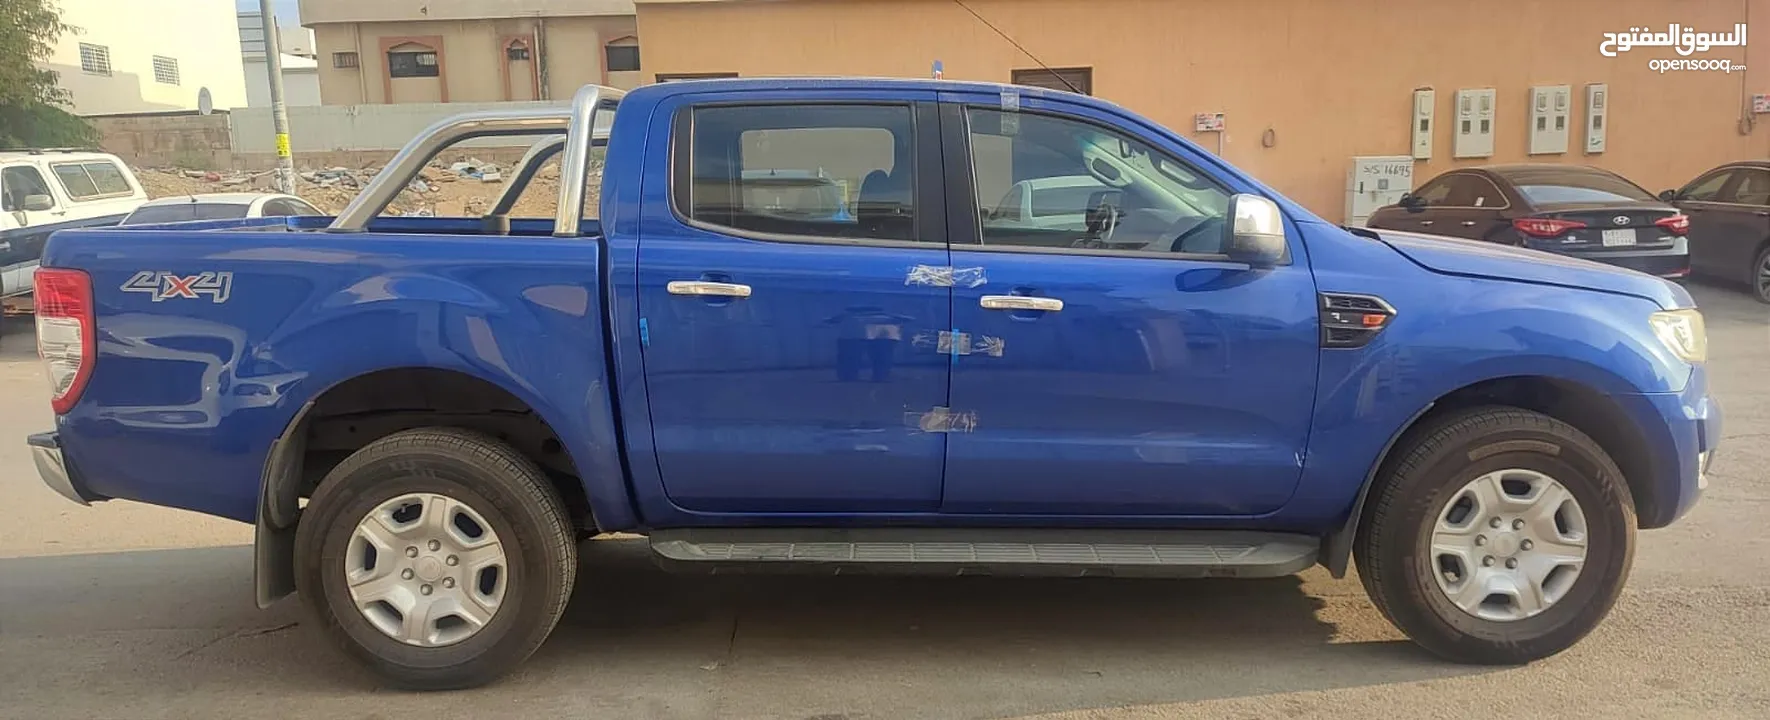 Ford Ranger Diesel Pick-up 2016 XLT Full Option 4x4 Vehicle Is In Excellent Condition